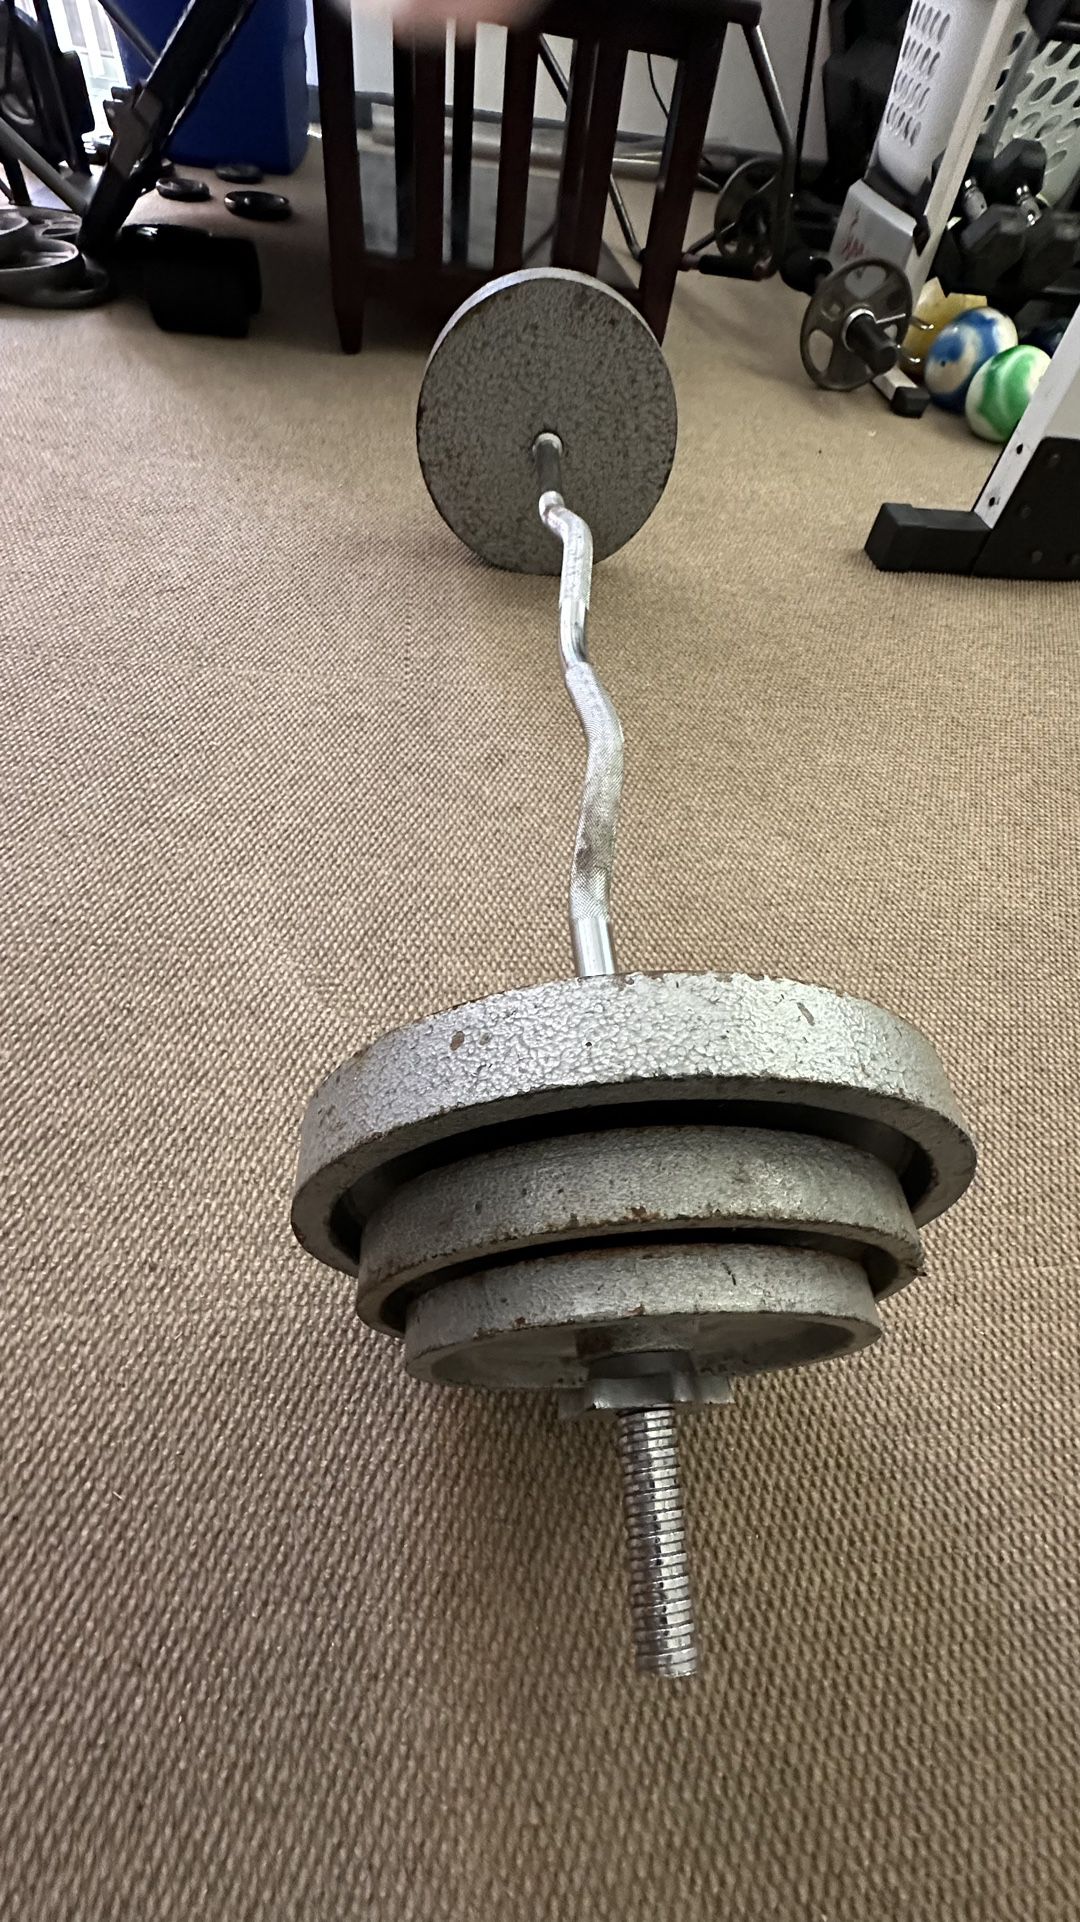 Lifting Bar With Weights